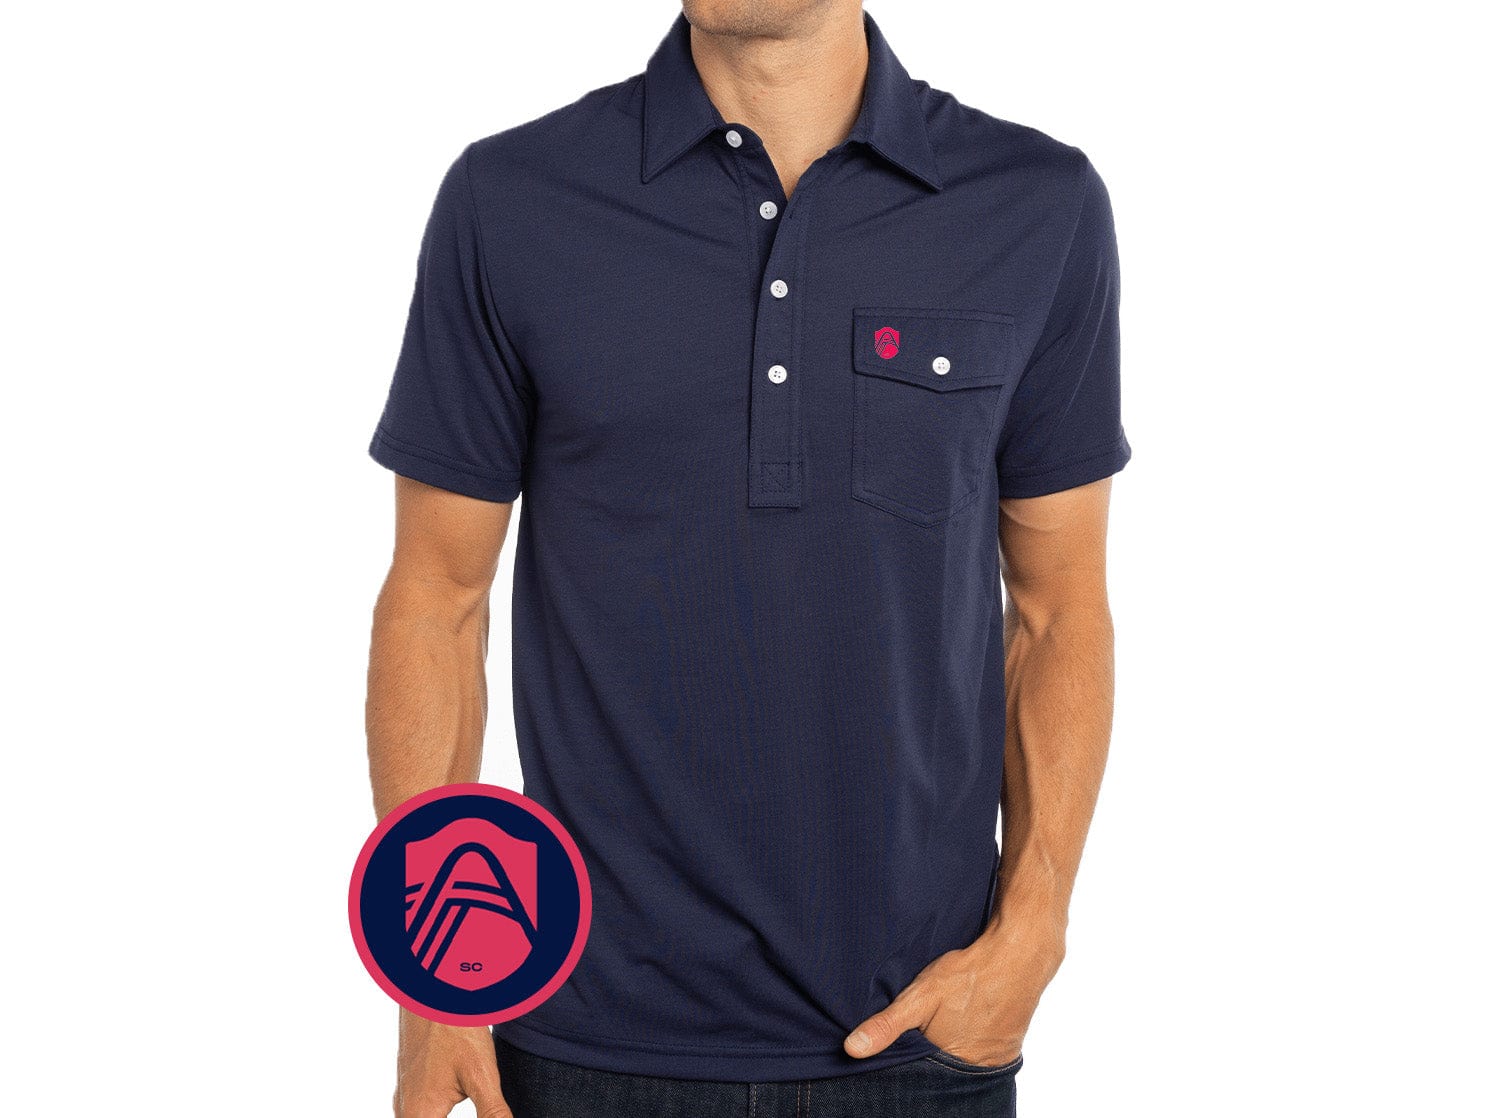 St. Louis City SC - Performance Players Shirt - Arch - Navy